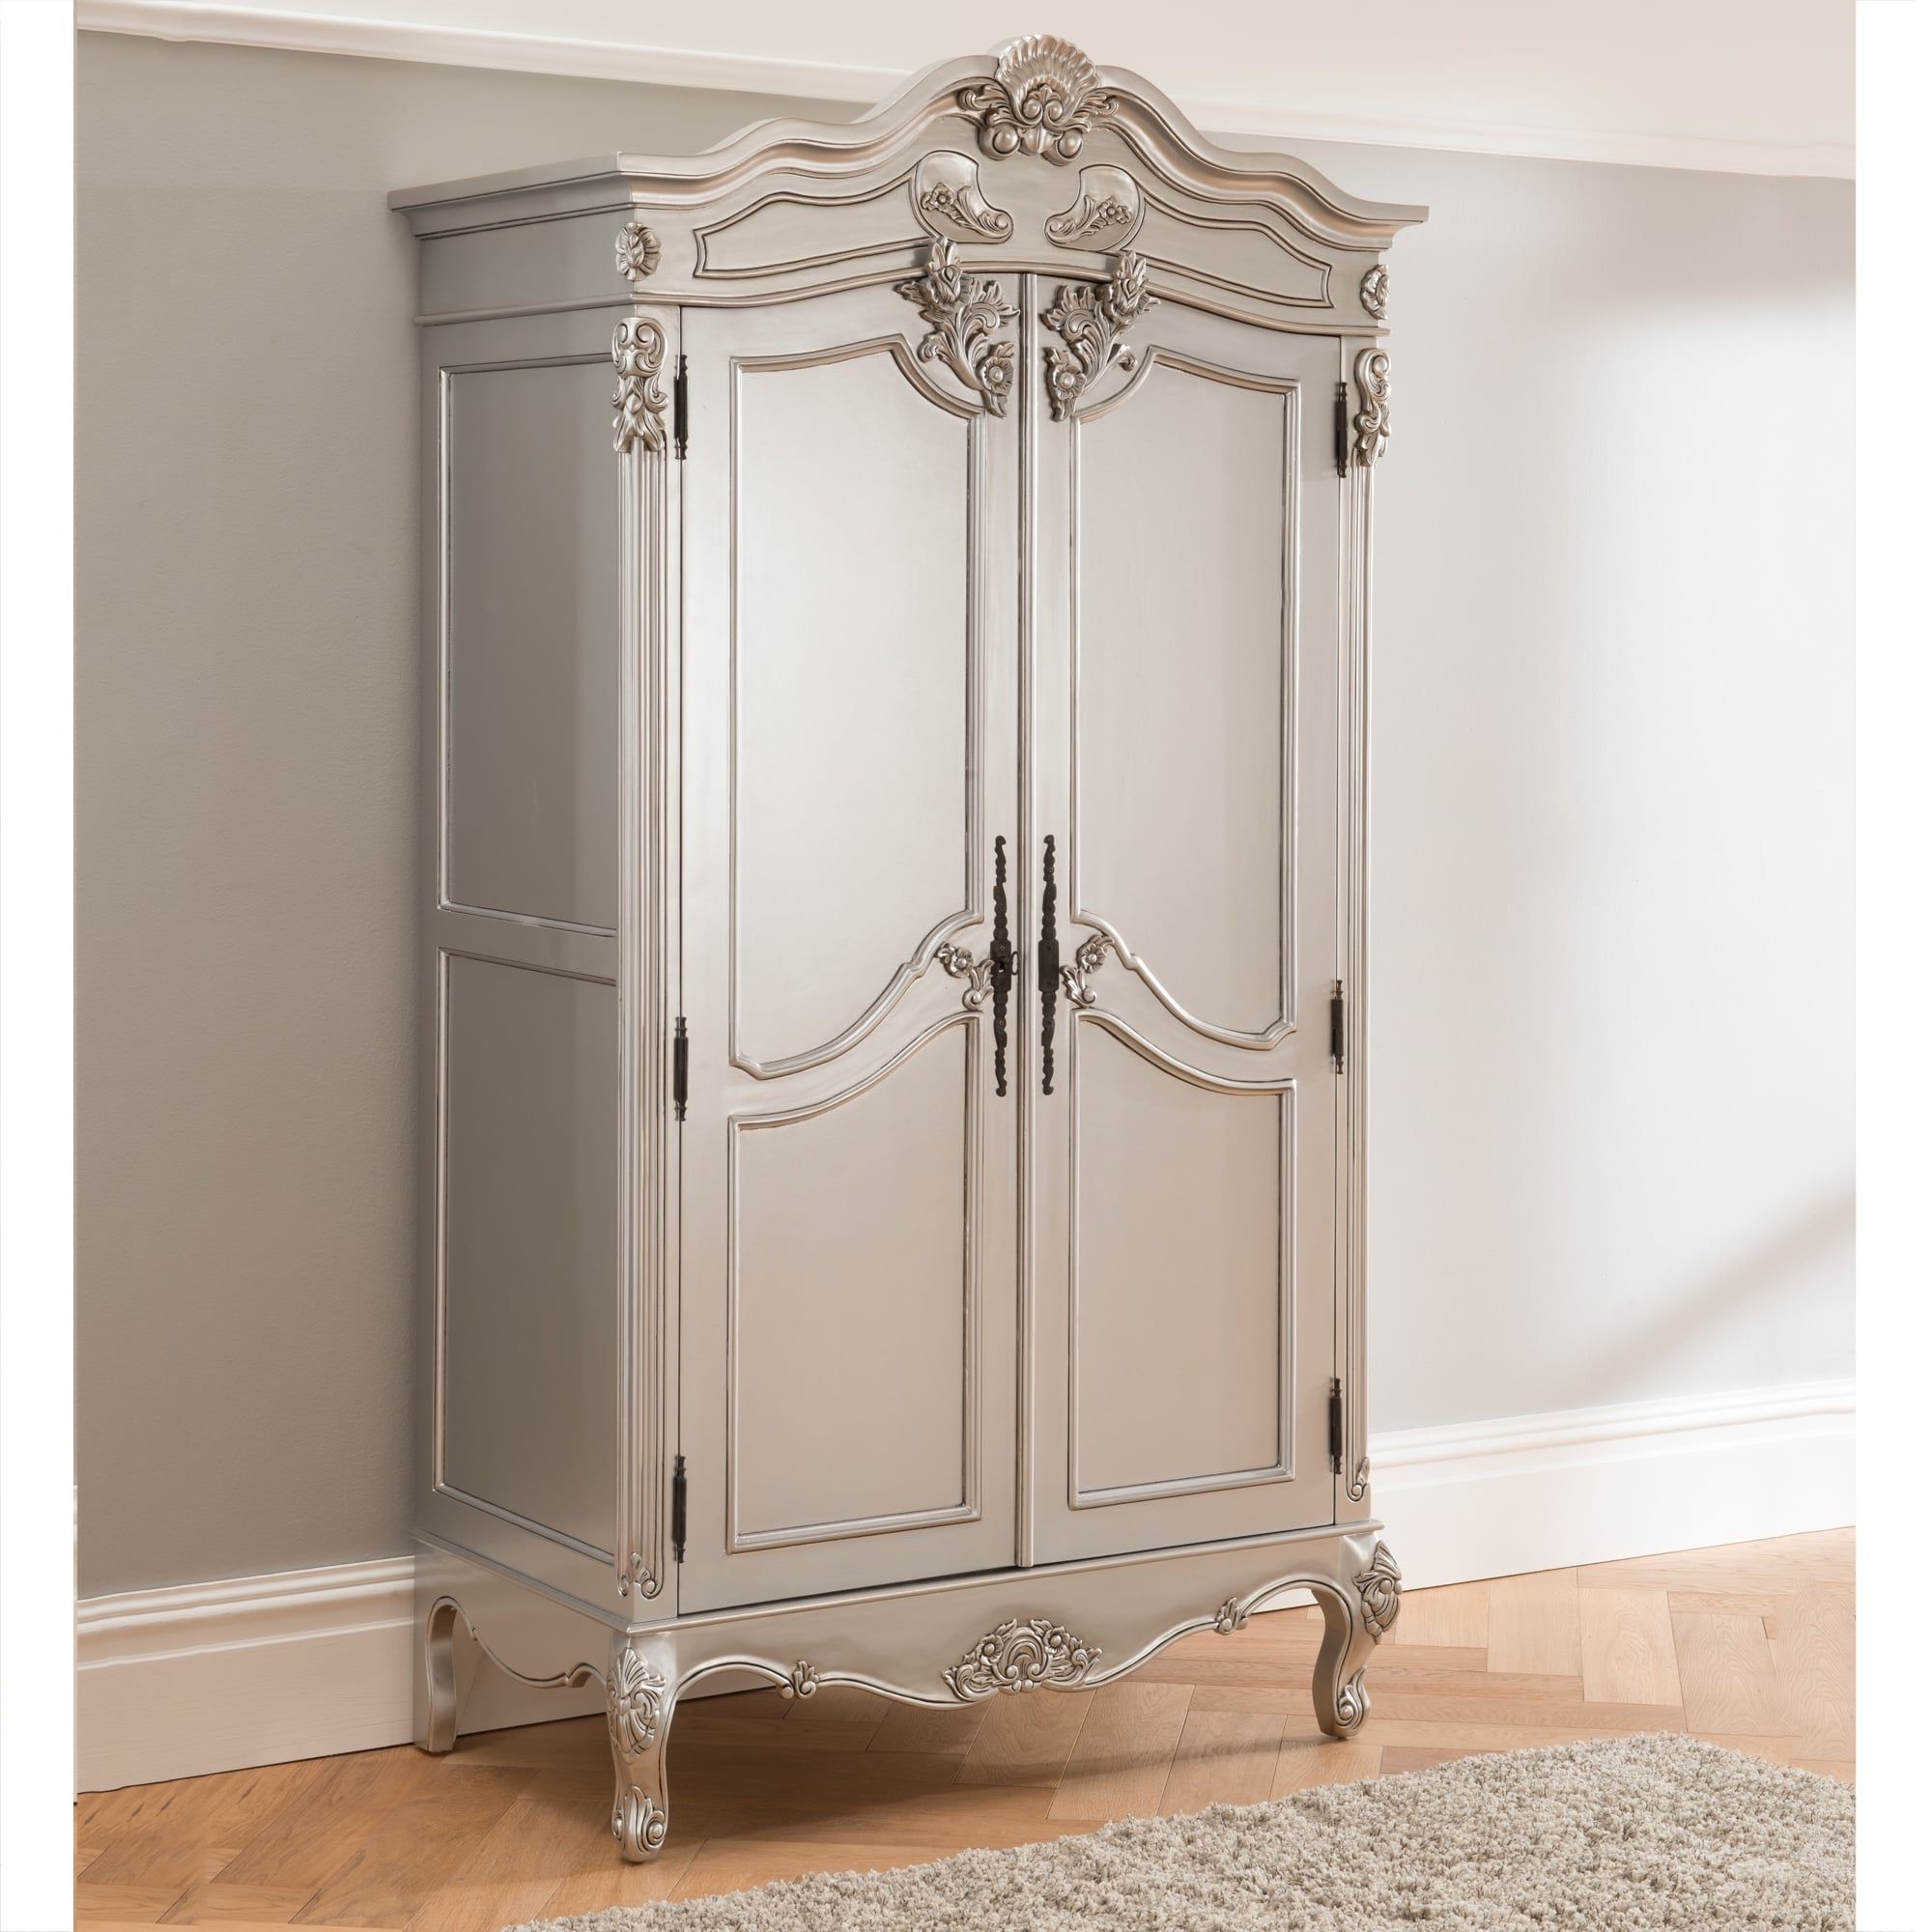 Baroque Antique French Wardrobe Works Exceptional Alongside Our Shabby Chic  Furniture Pertaining To Cheap French Style Wardrobes (View 5 of 20)